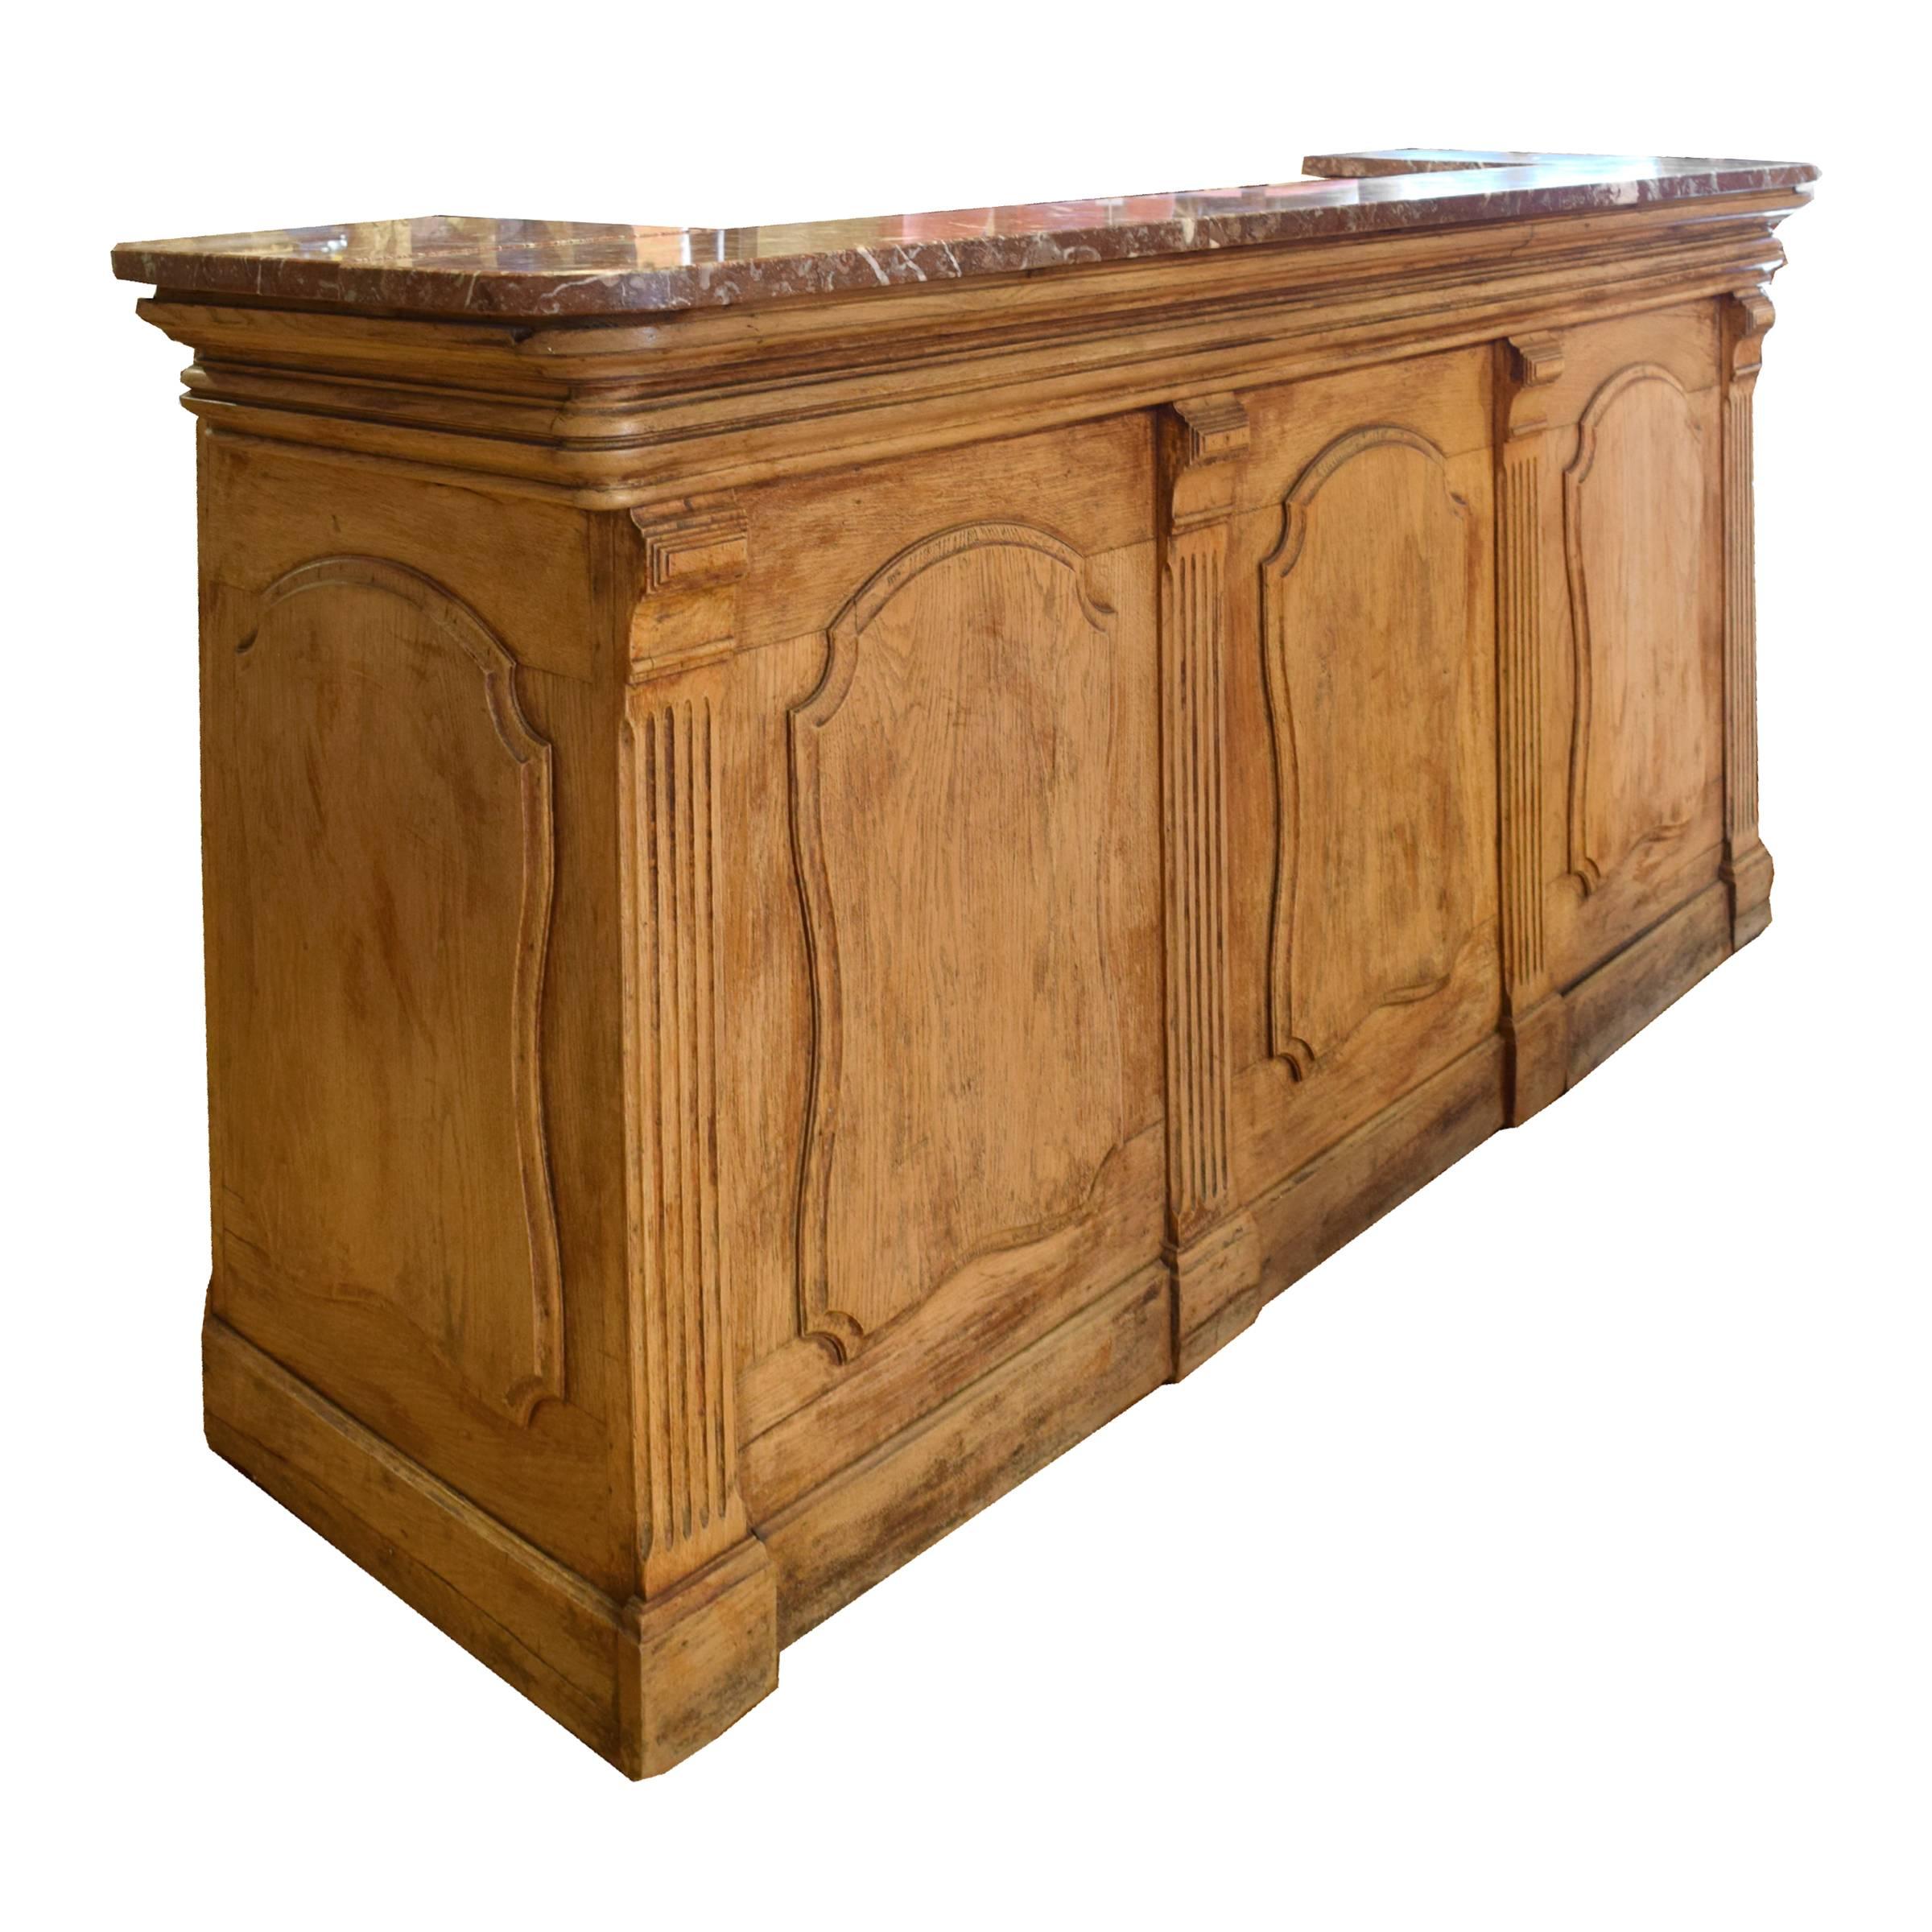 A great French oak desk or bar, from a Paris cafe, with panelled front and sides and a rose red marble top and surround, circa 1920.